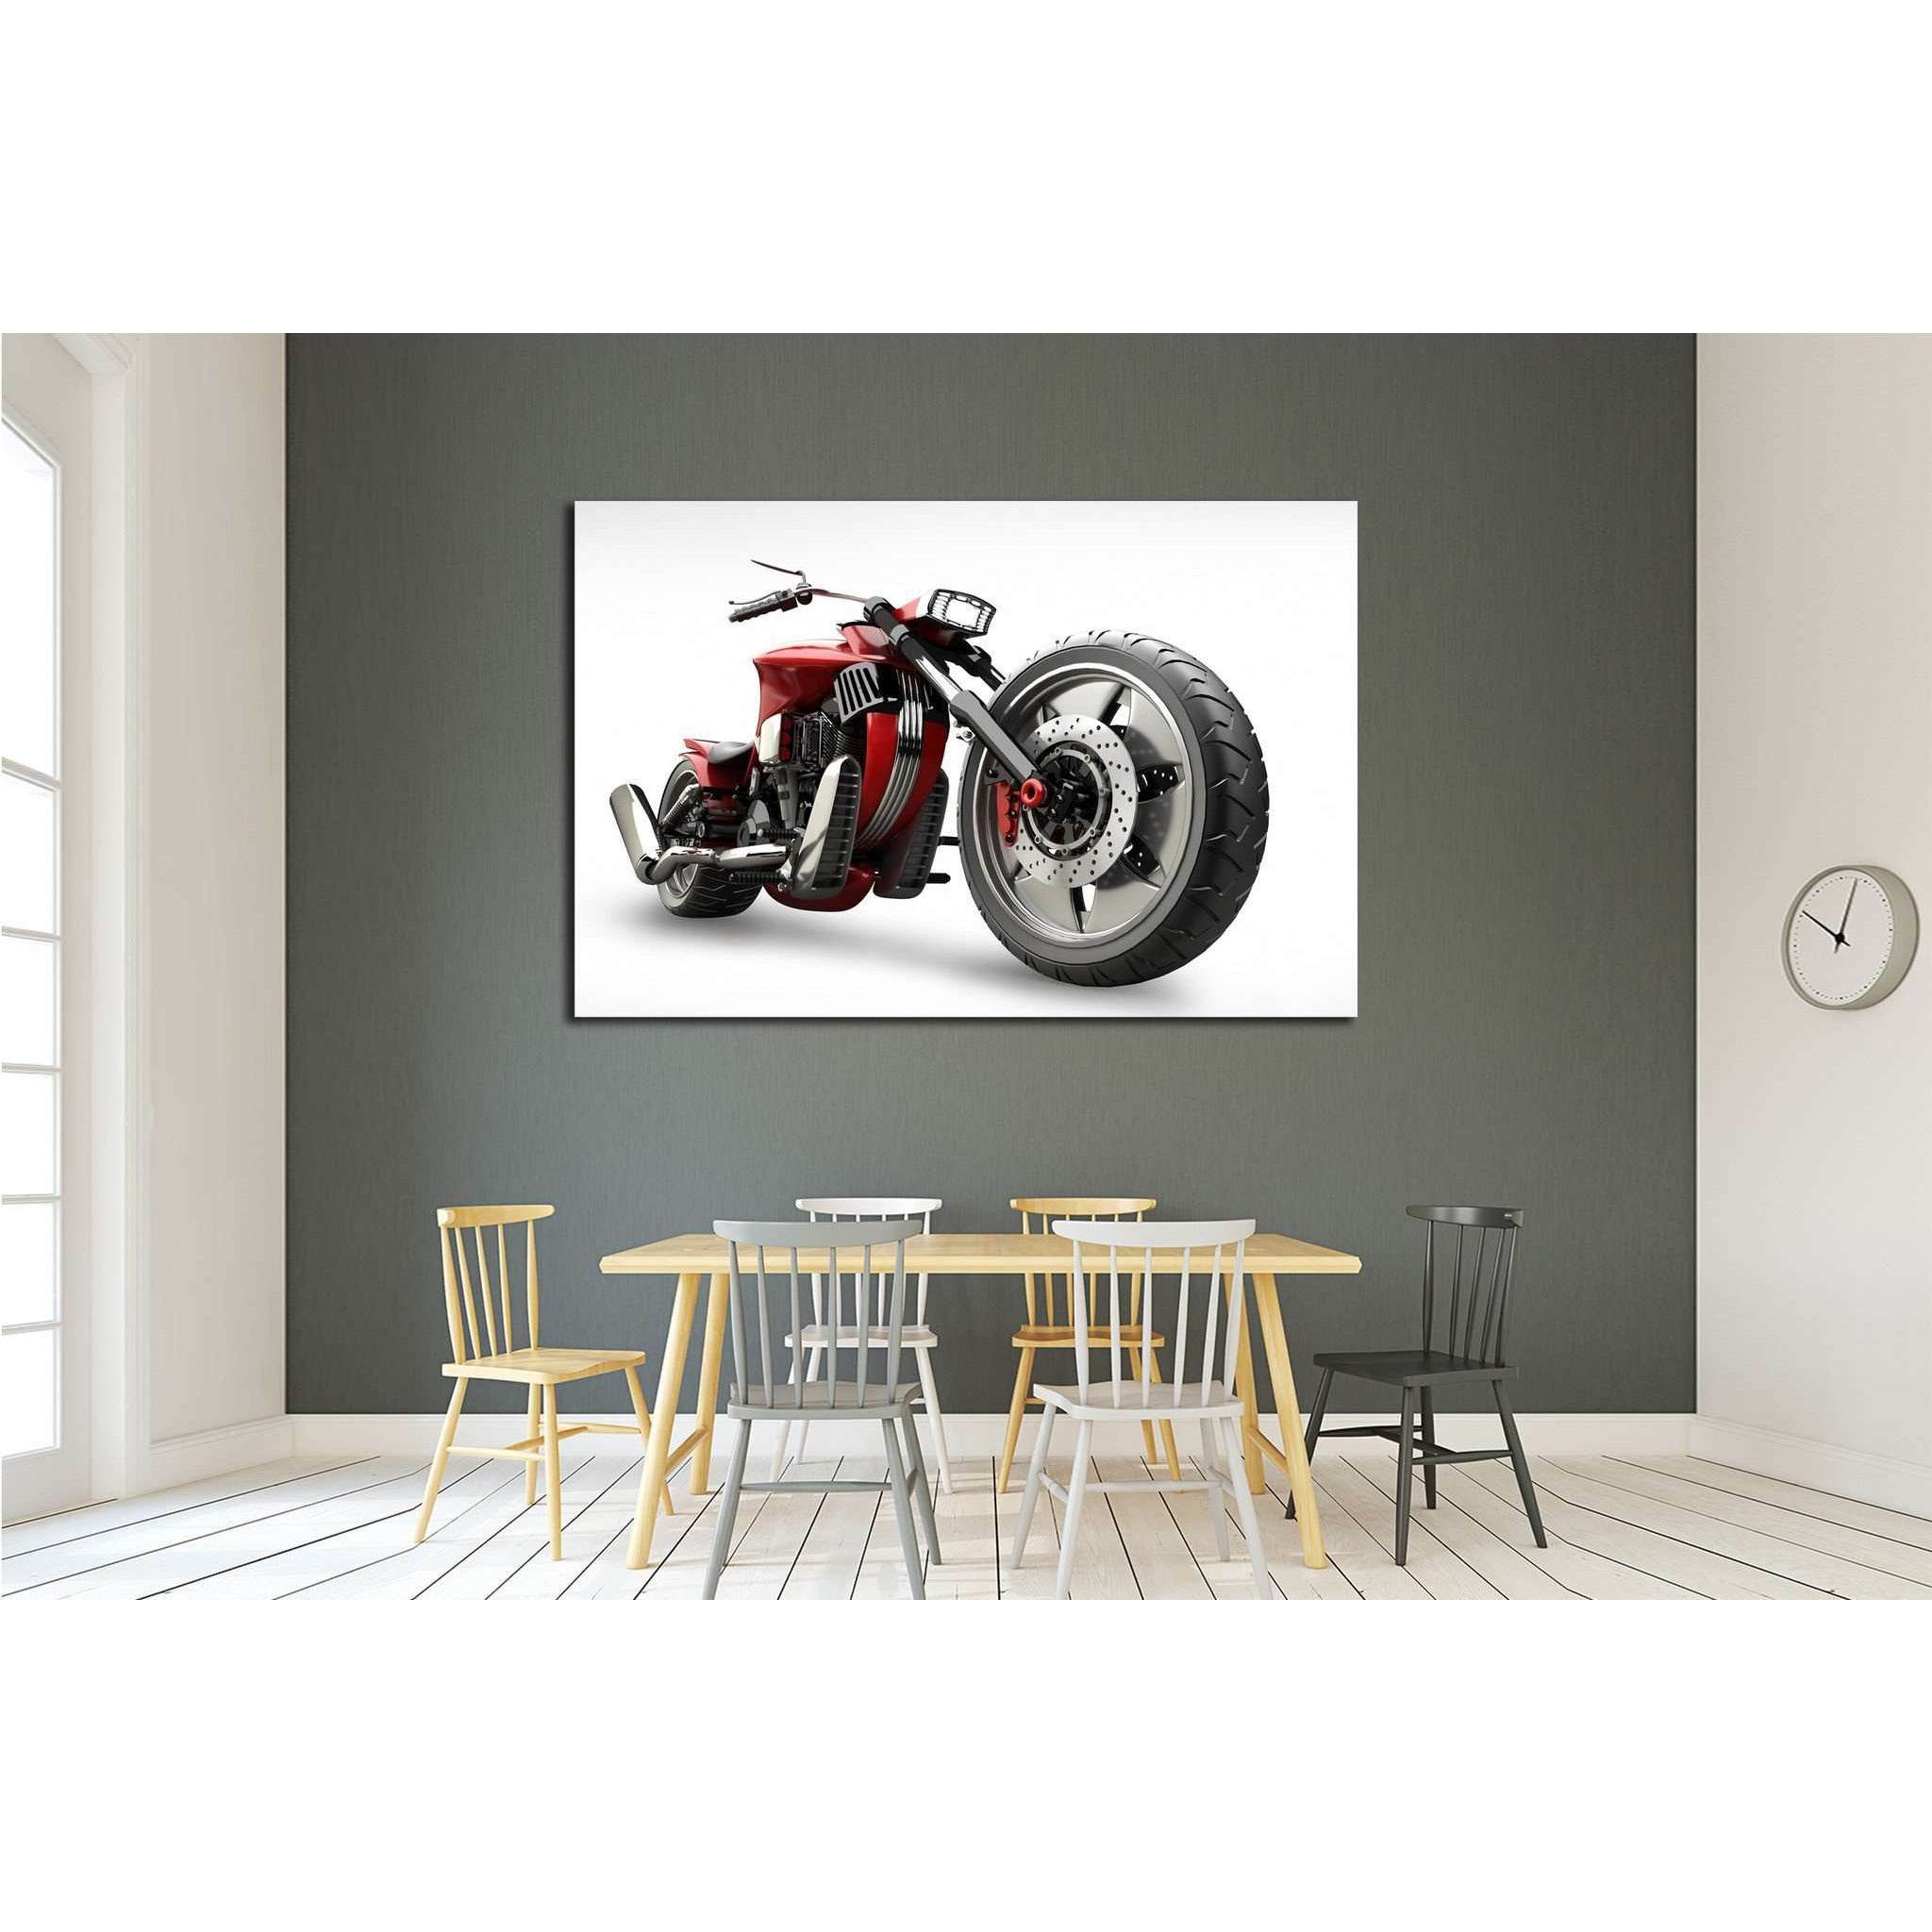 concept motorcycle isolated on white background №1864 Ready to Hang Canvas Print